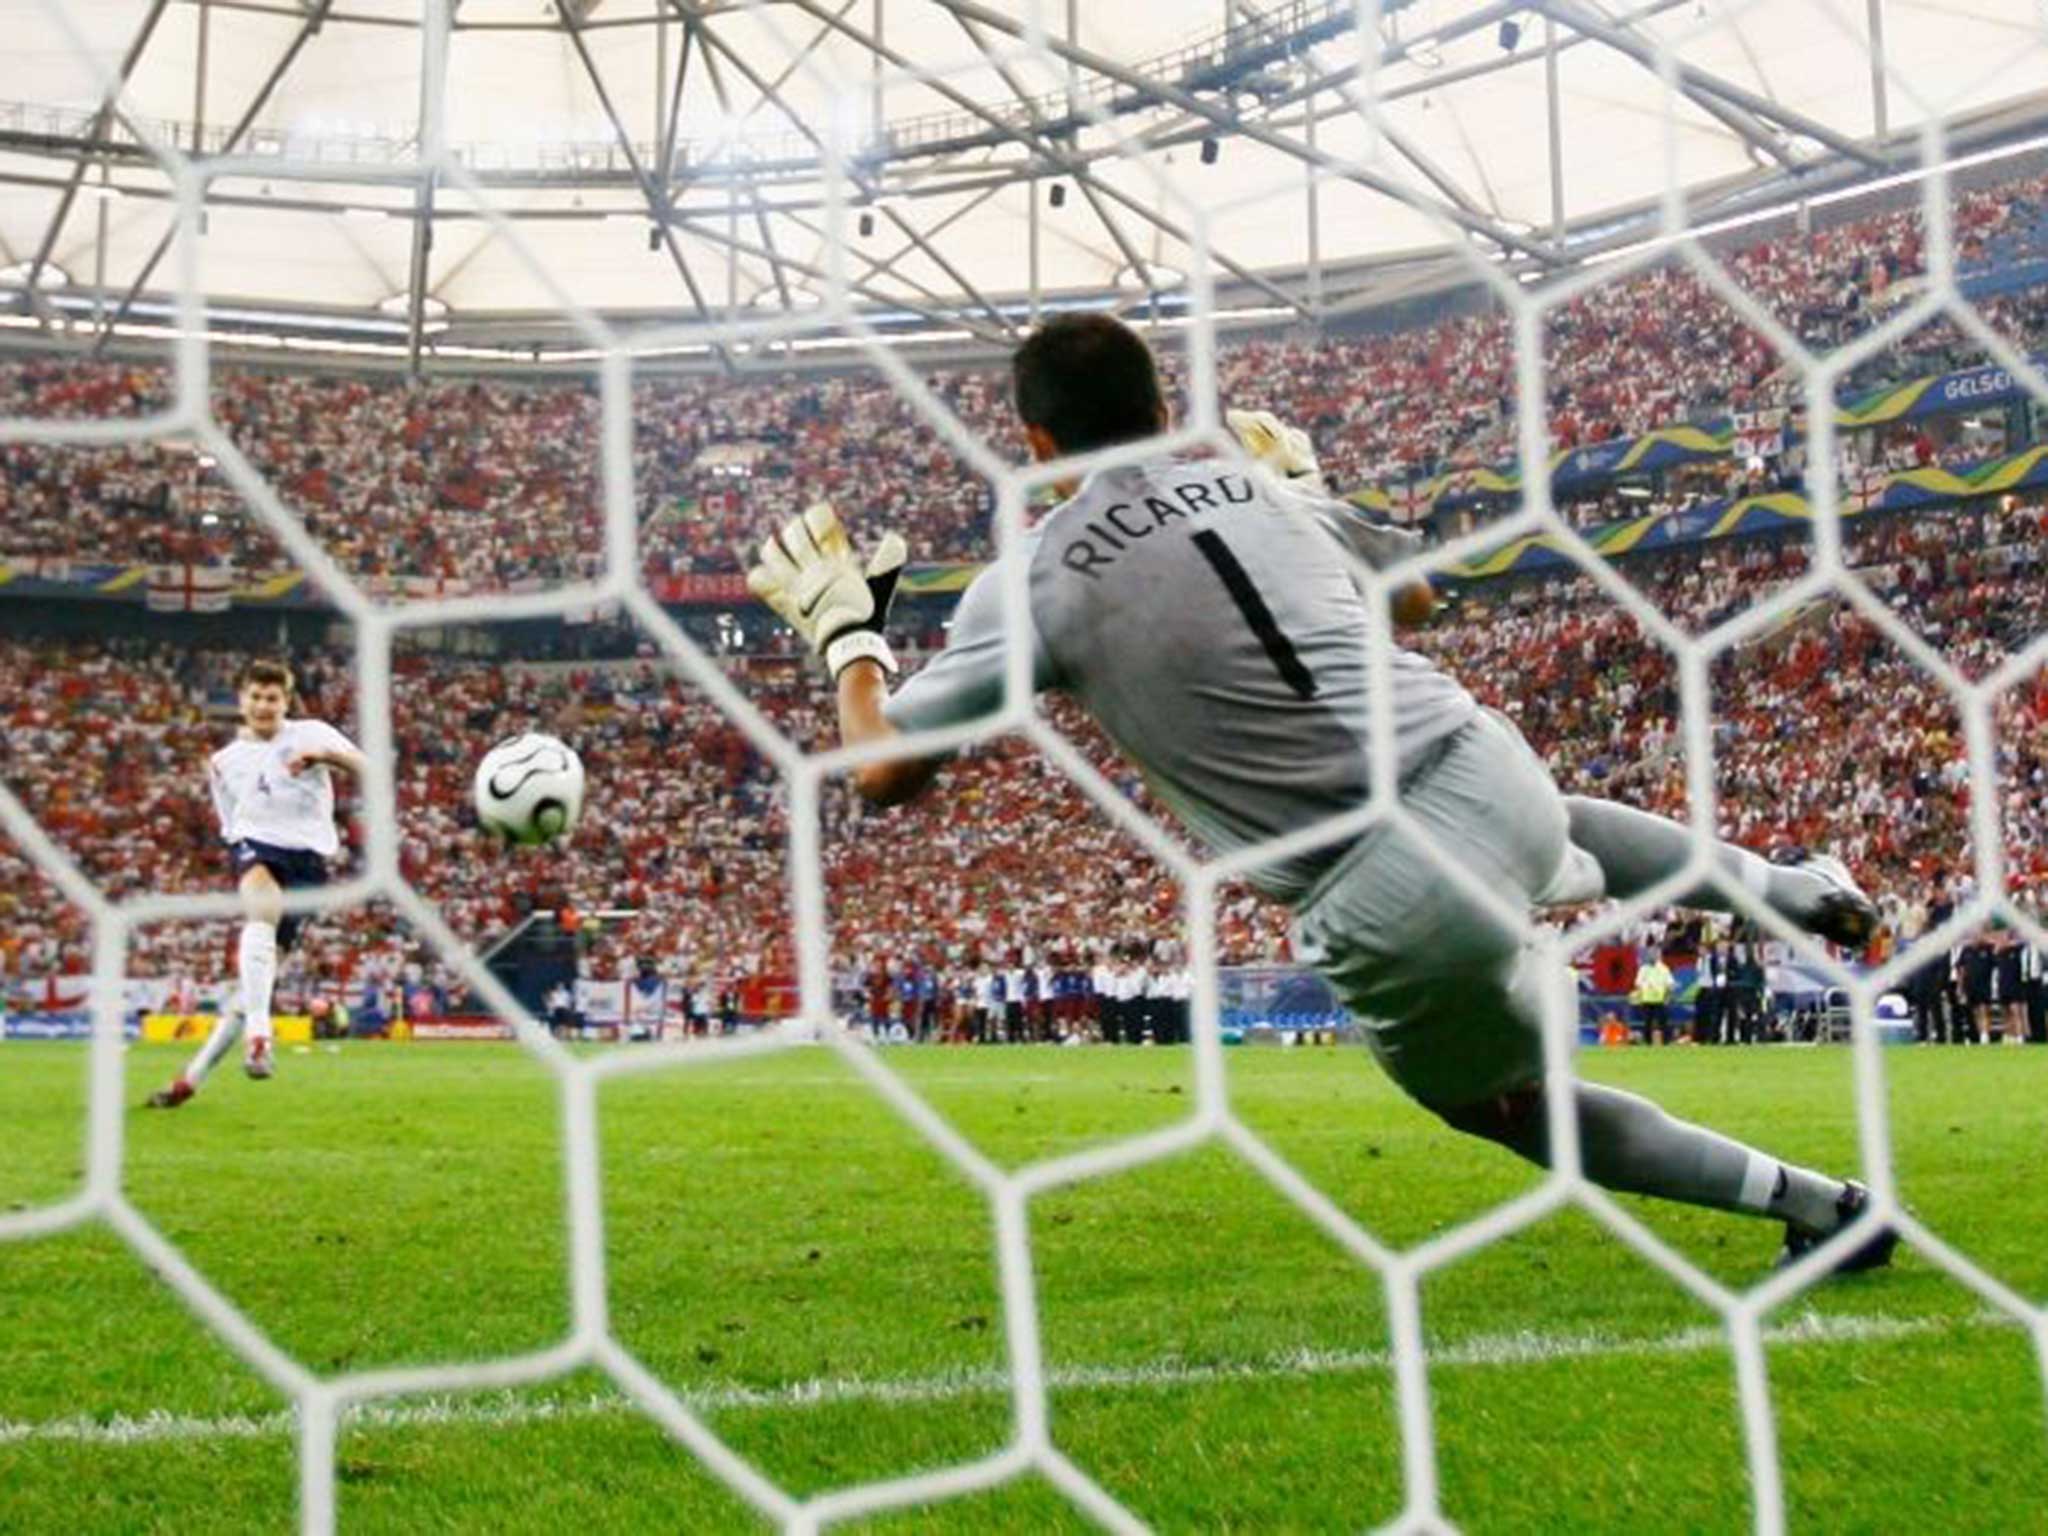 Steven Gerrard has his penalty saved by Portugal goalkeeper Ricardo in the 2006 World Cup quarter-final